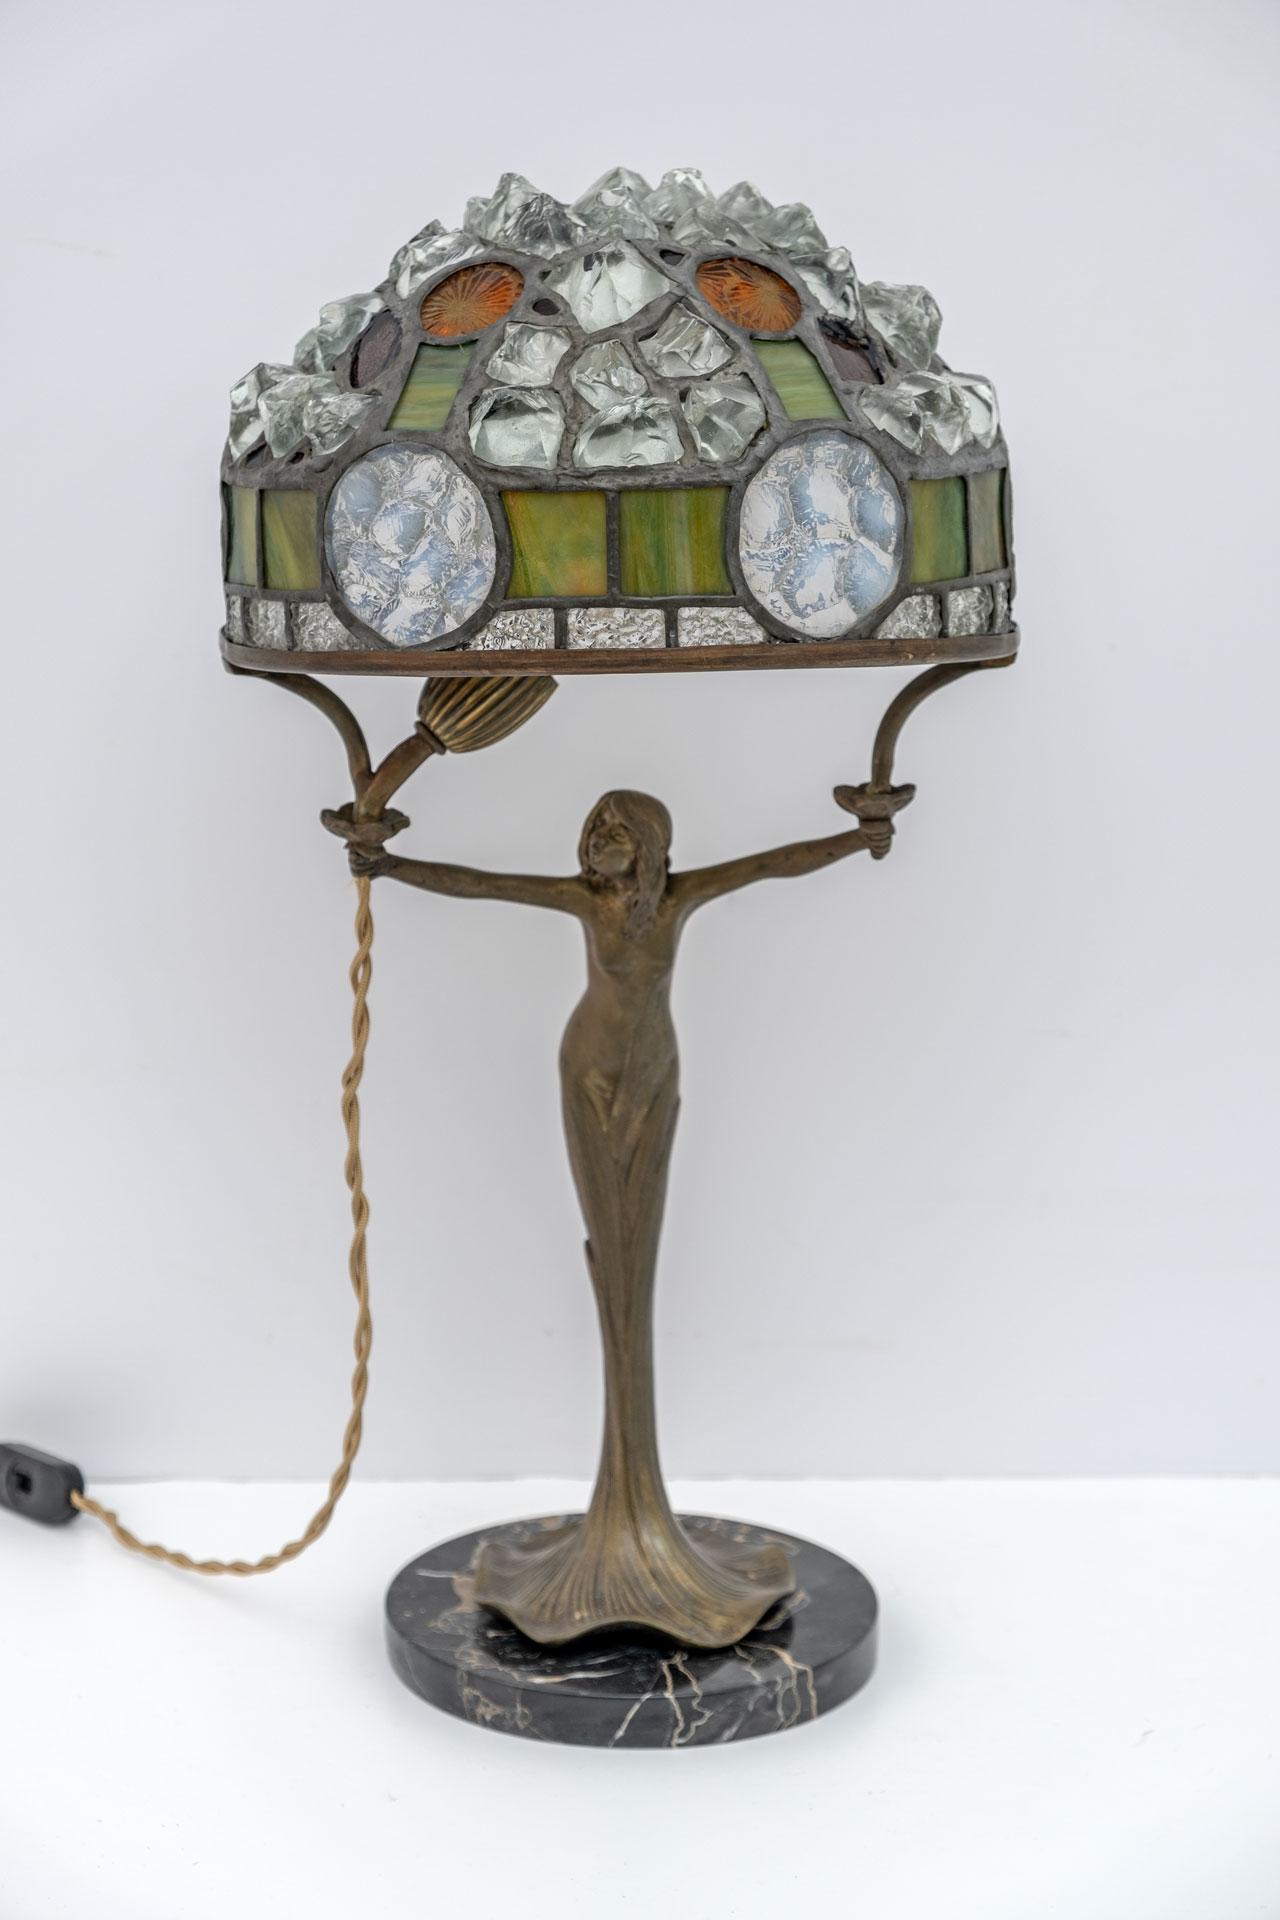 A beautiful Tiffany style table lamp, French production from the 1930s, Art Nouveau period. The base is in cast brass and base in black marble, the lampshade in colored glass and crystal pieces, leaded together. This lamp stands out from many others